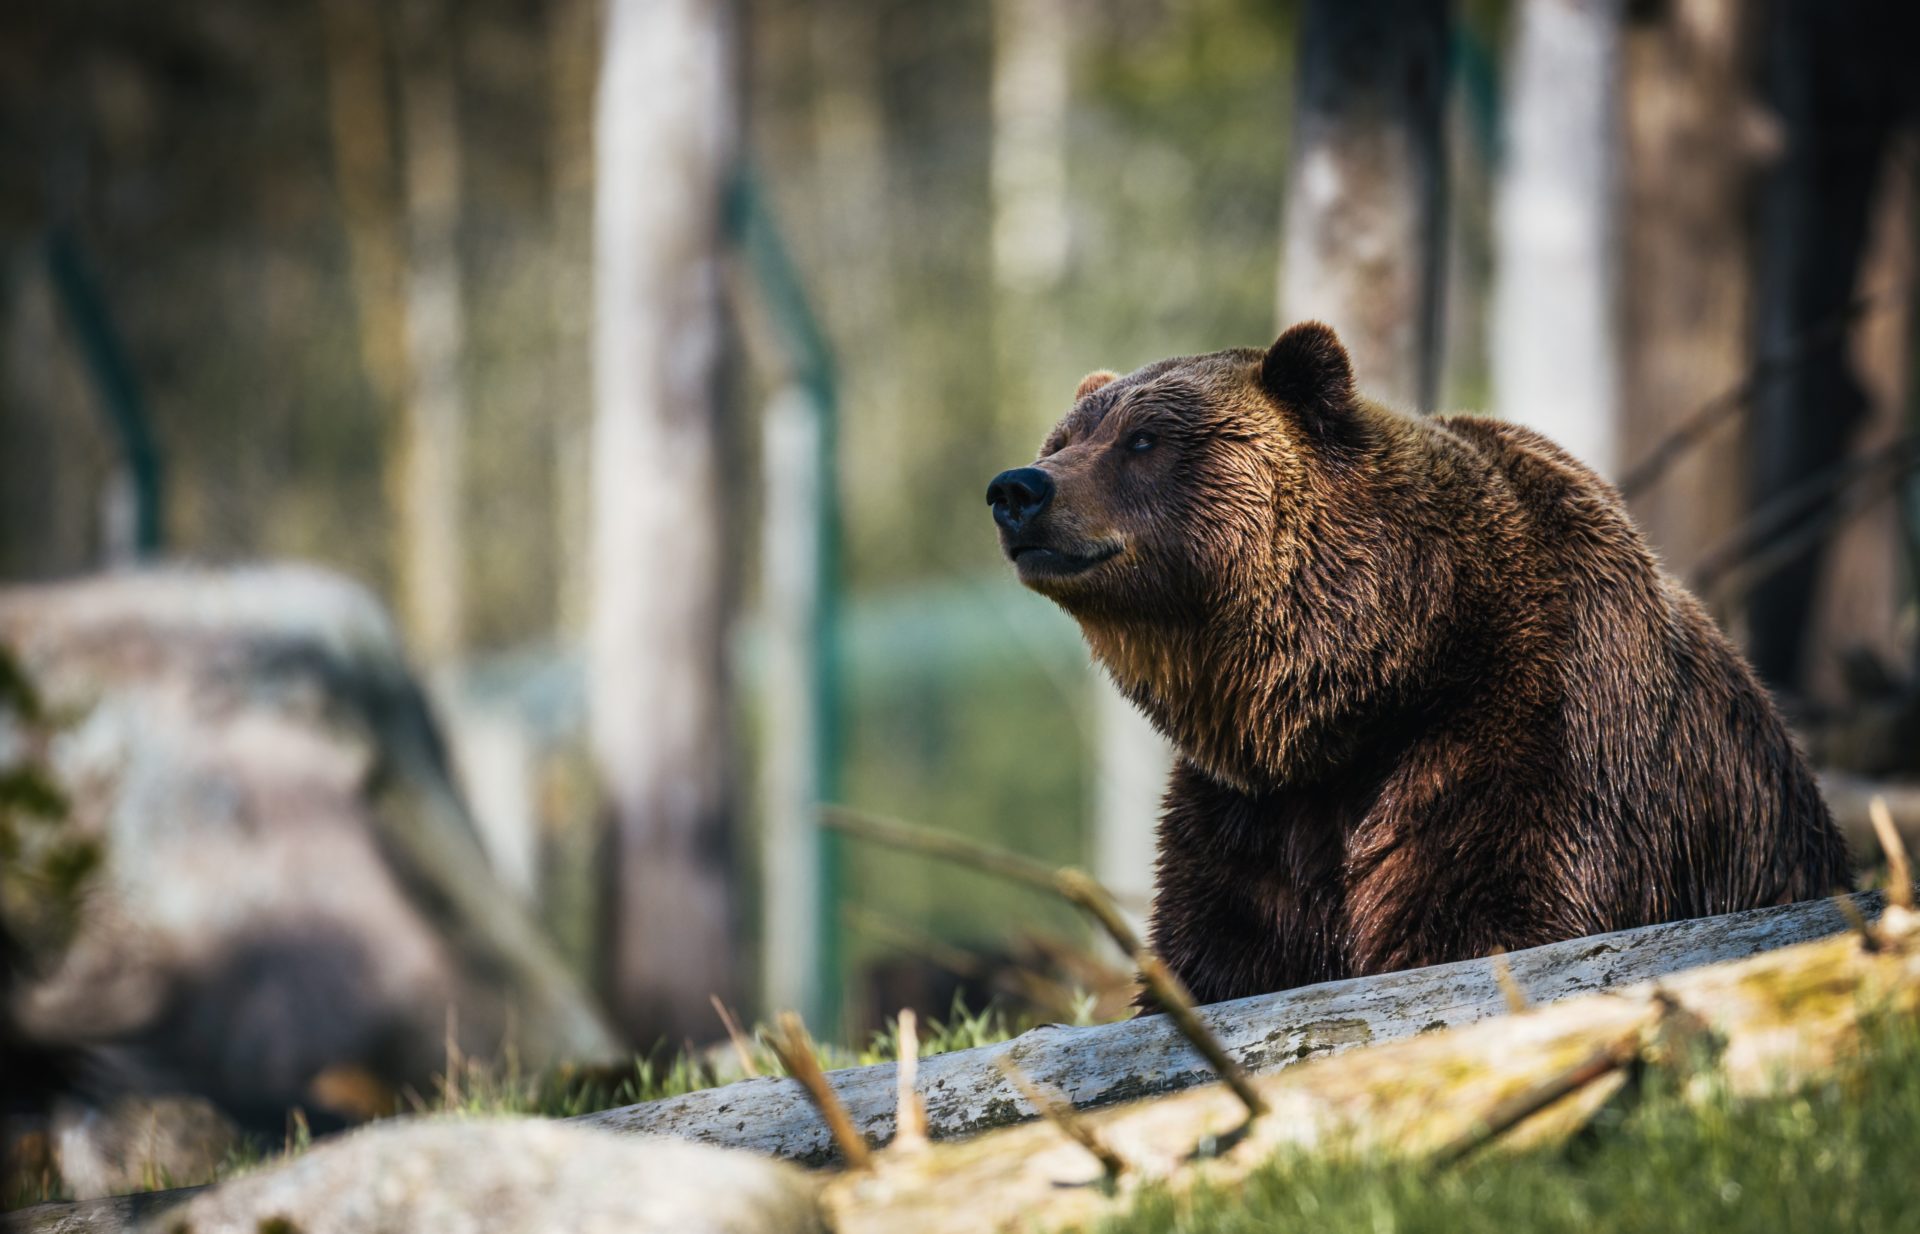 Prominent Investor: This Bitcoin Bear Season May Last For A While 10